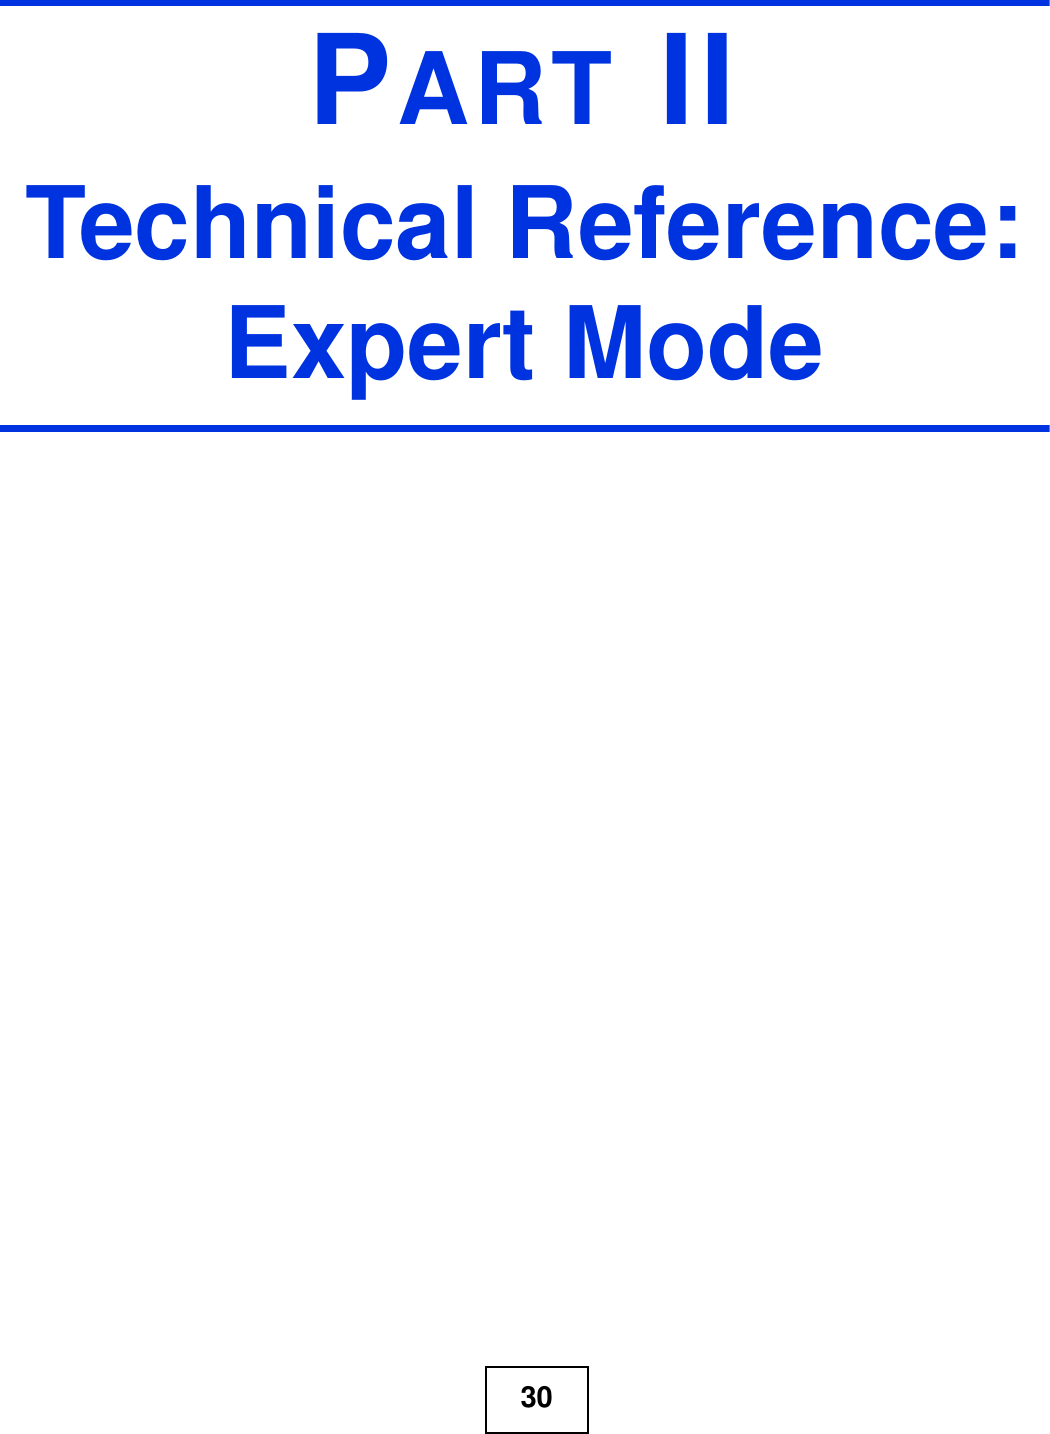 30PART IITechnical Reference: Expert Mode